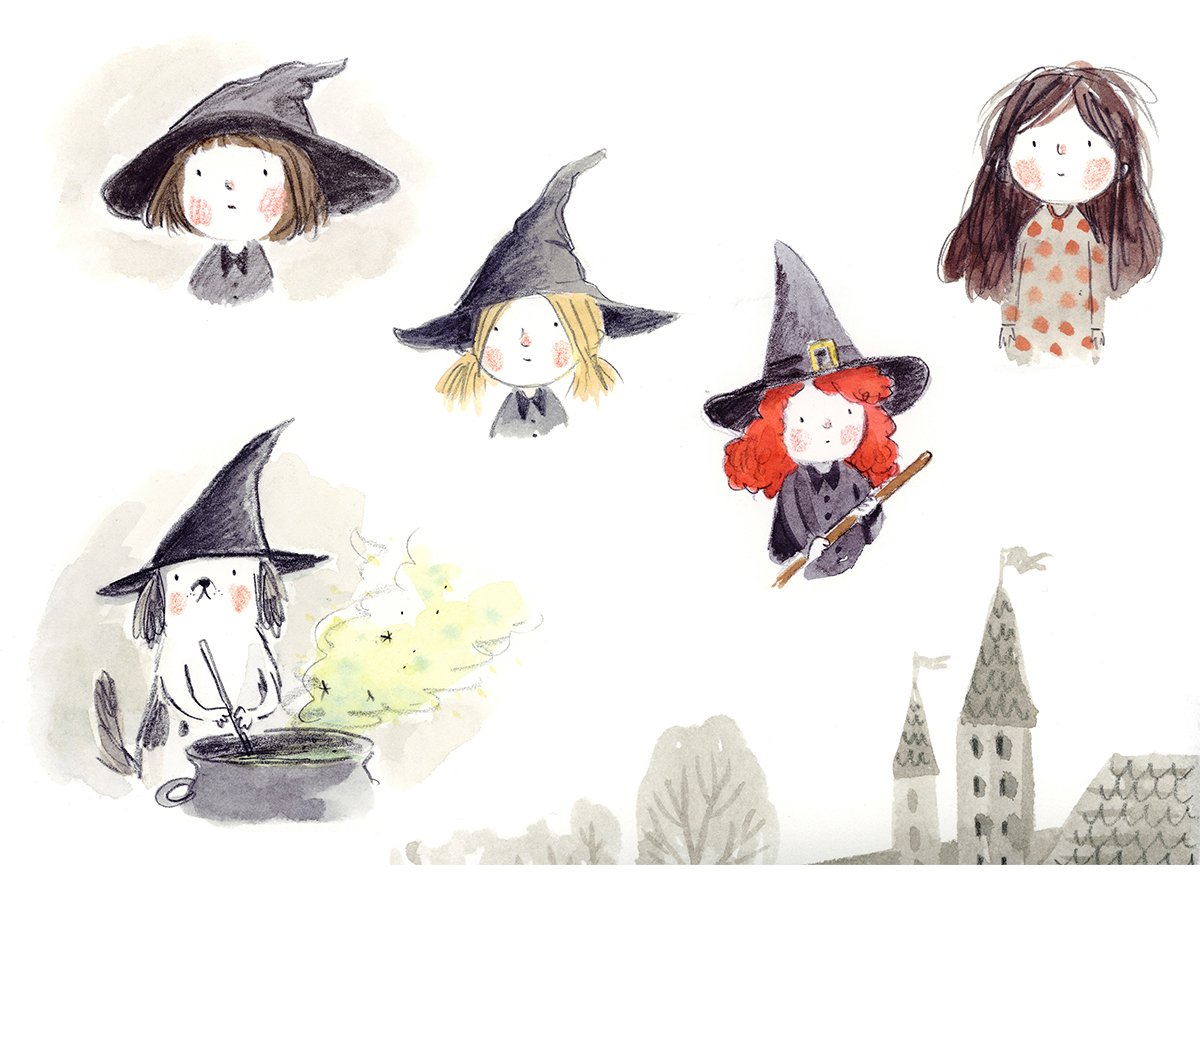 becky-cameron-dog-witches-2-illustration.jpg